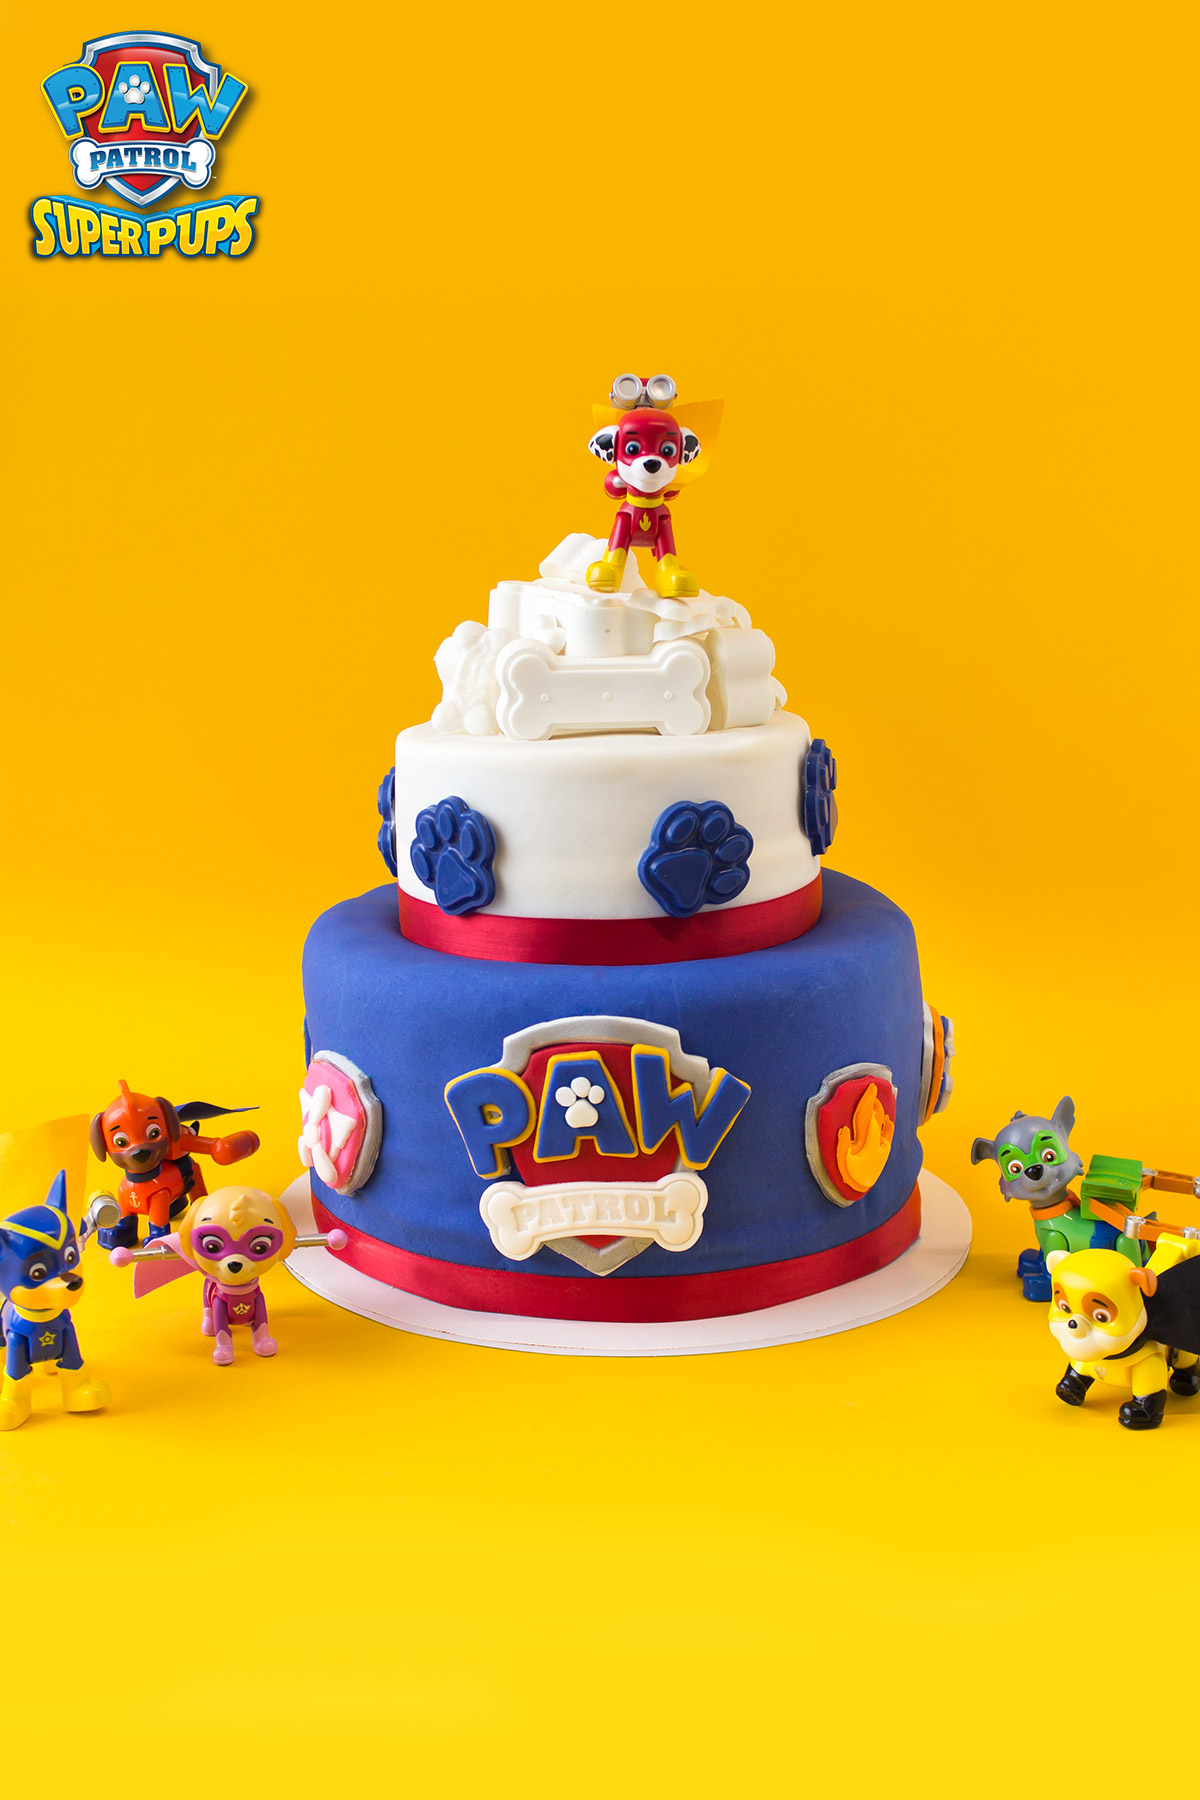 Hoved Aktiver Ren PAW Patrol Super Pups Party Hack | Nickelodeon Parents